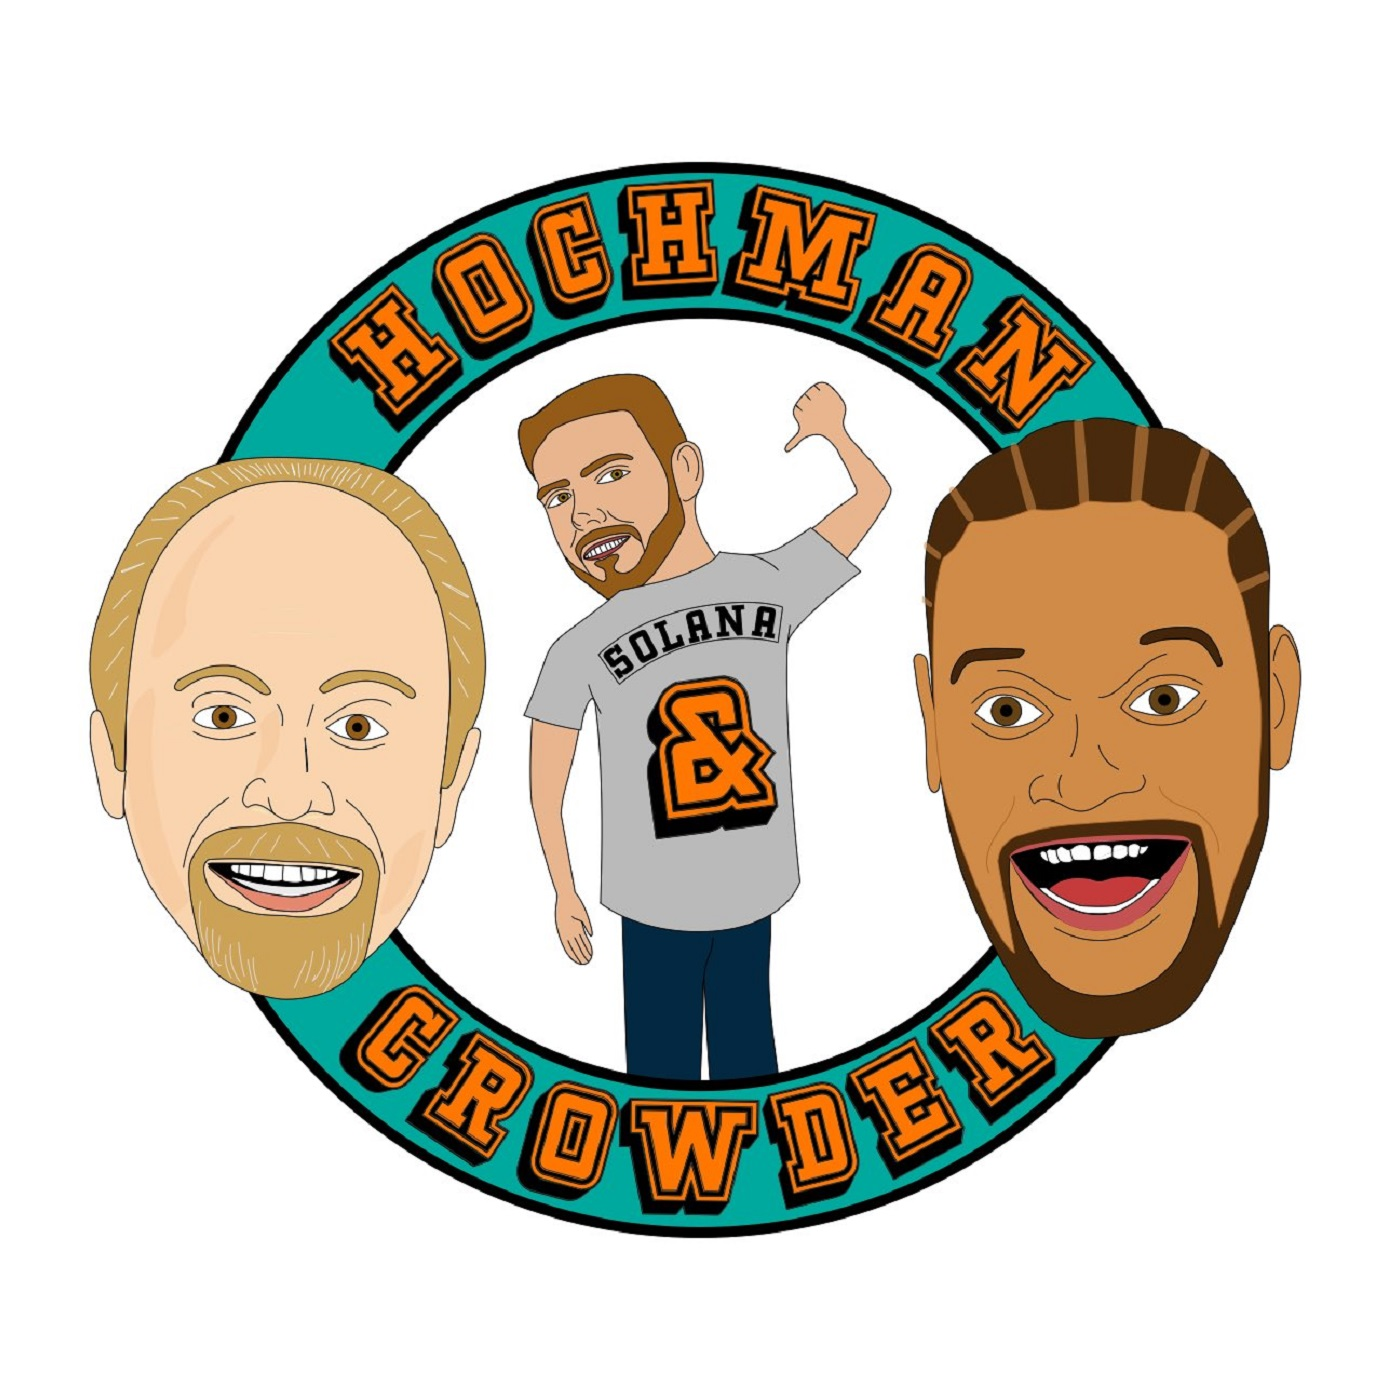 06-20-2019 - Hoch and Crowder Podcast Hour 1